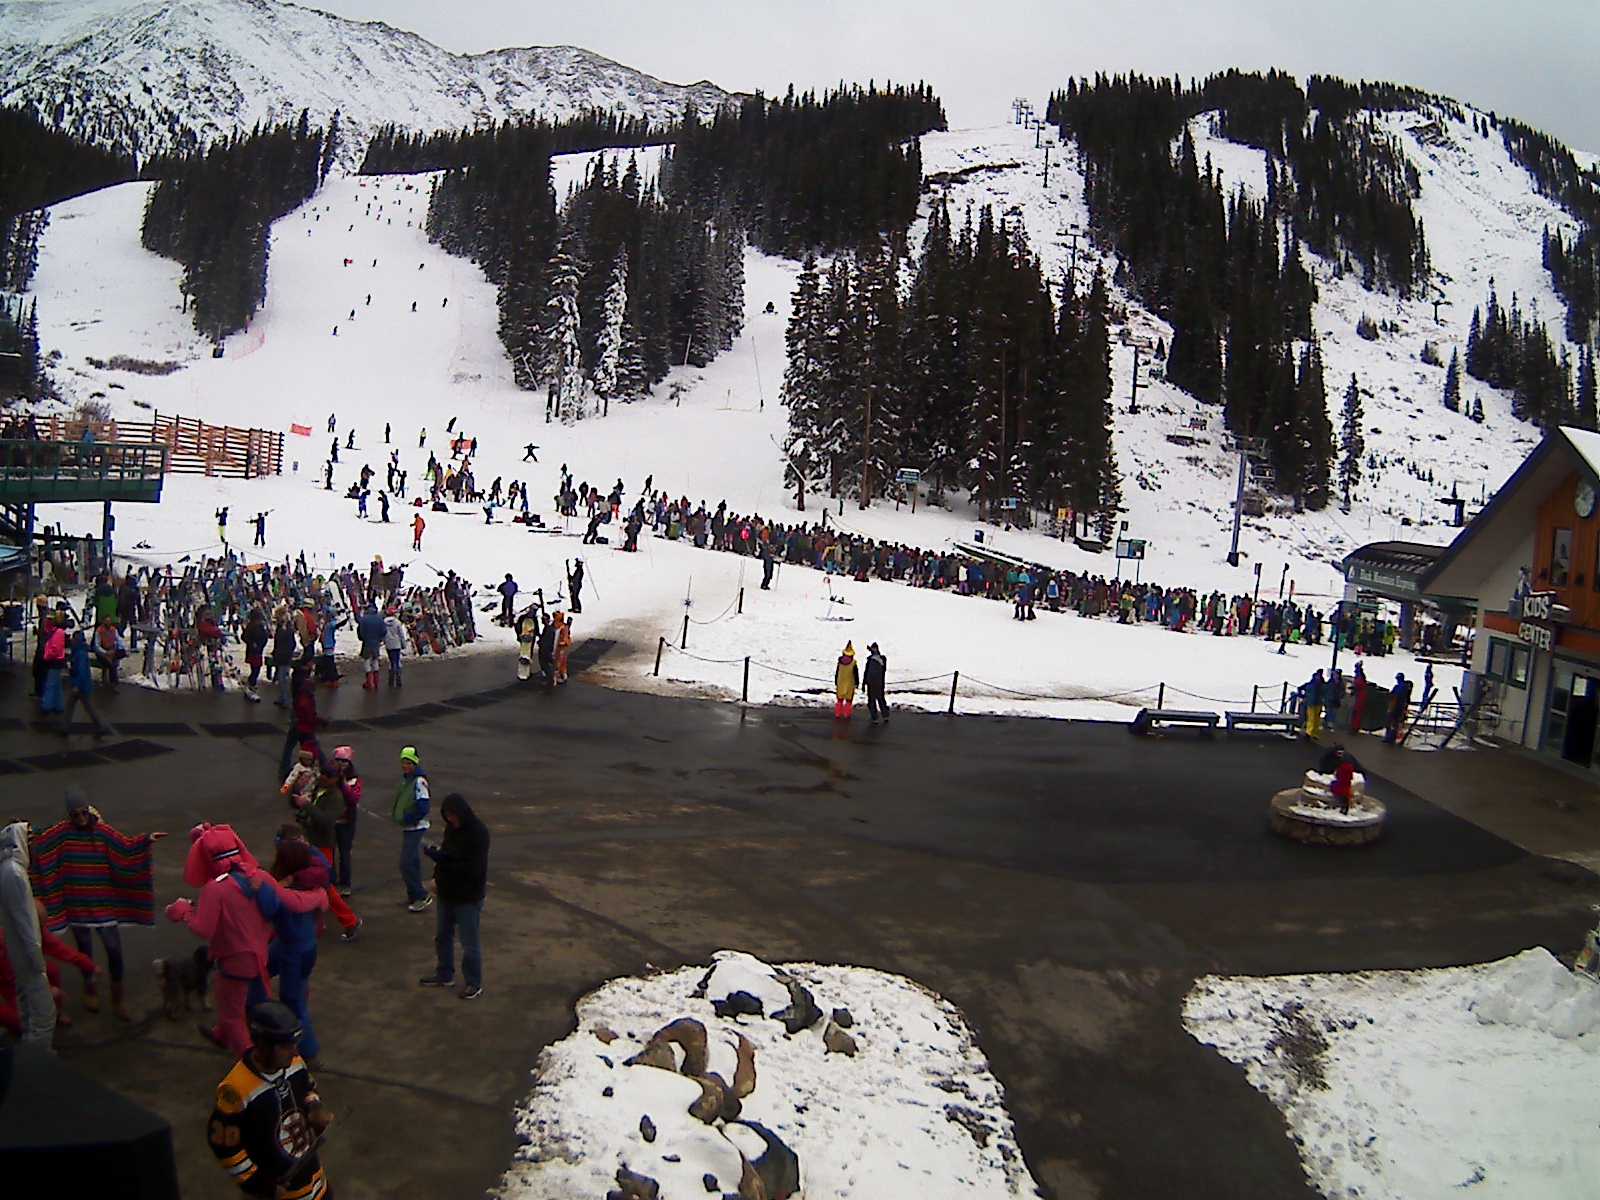 Arapahoe Basin, CO today at 2pm